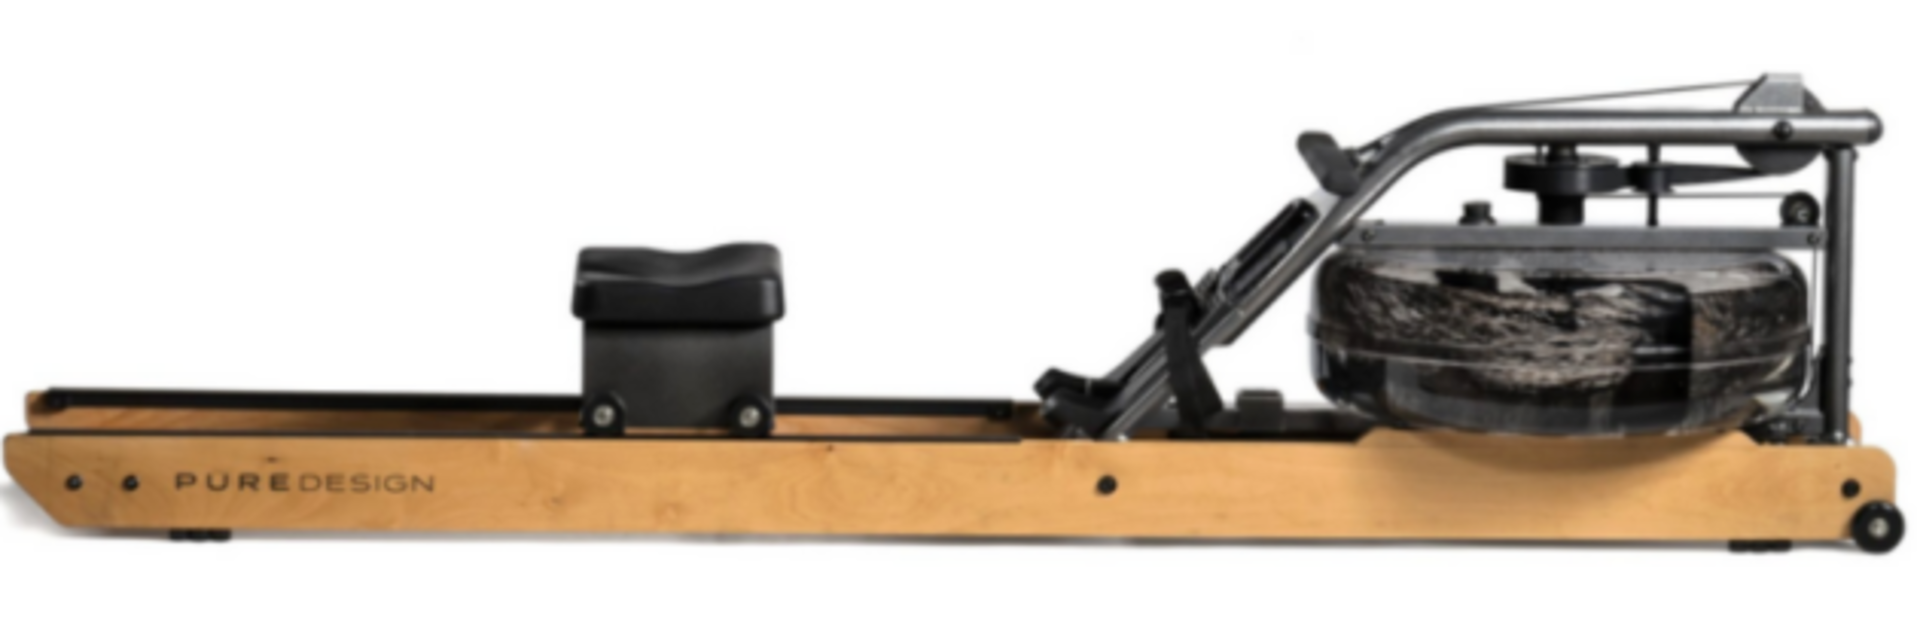 Pure Design - Pure Design VR2 Water Rower - Damaged Connection, Missing Parts - Viewing Recommended.